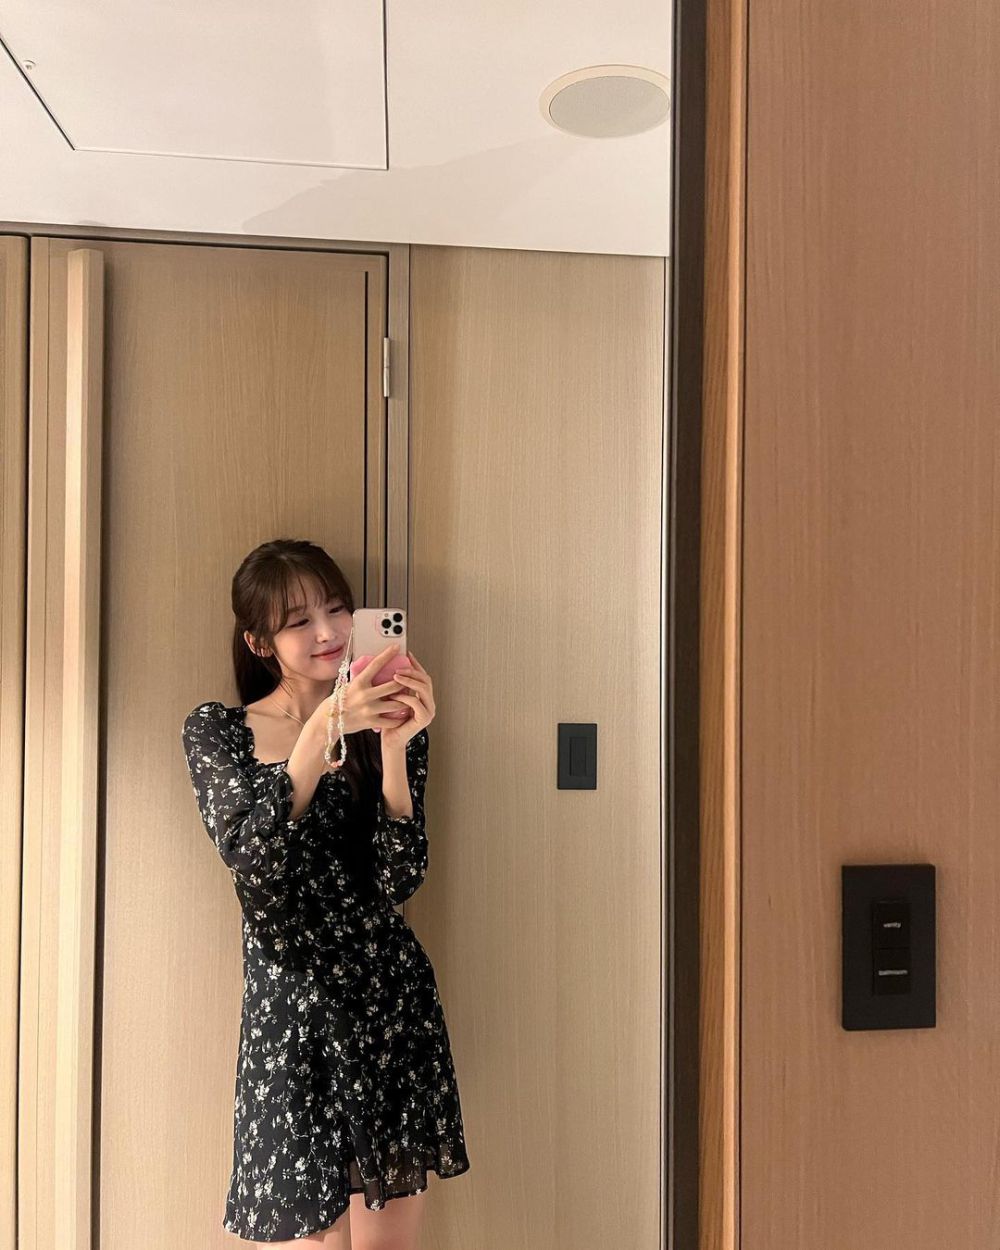 10 Ide Outfit Girly ala Arin Oh My Girl, Tampil Fresh dan Cute!